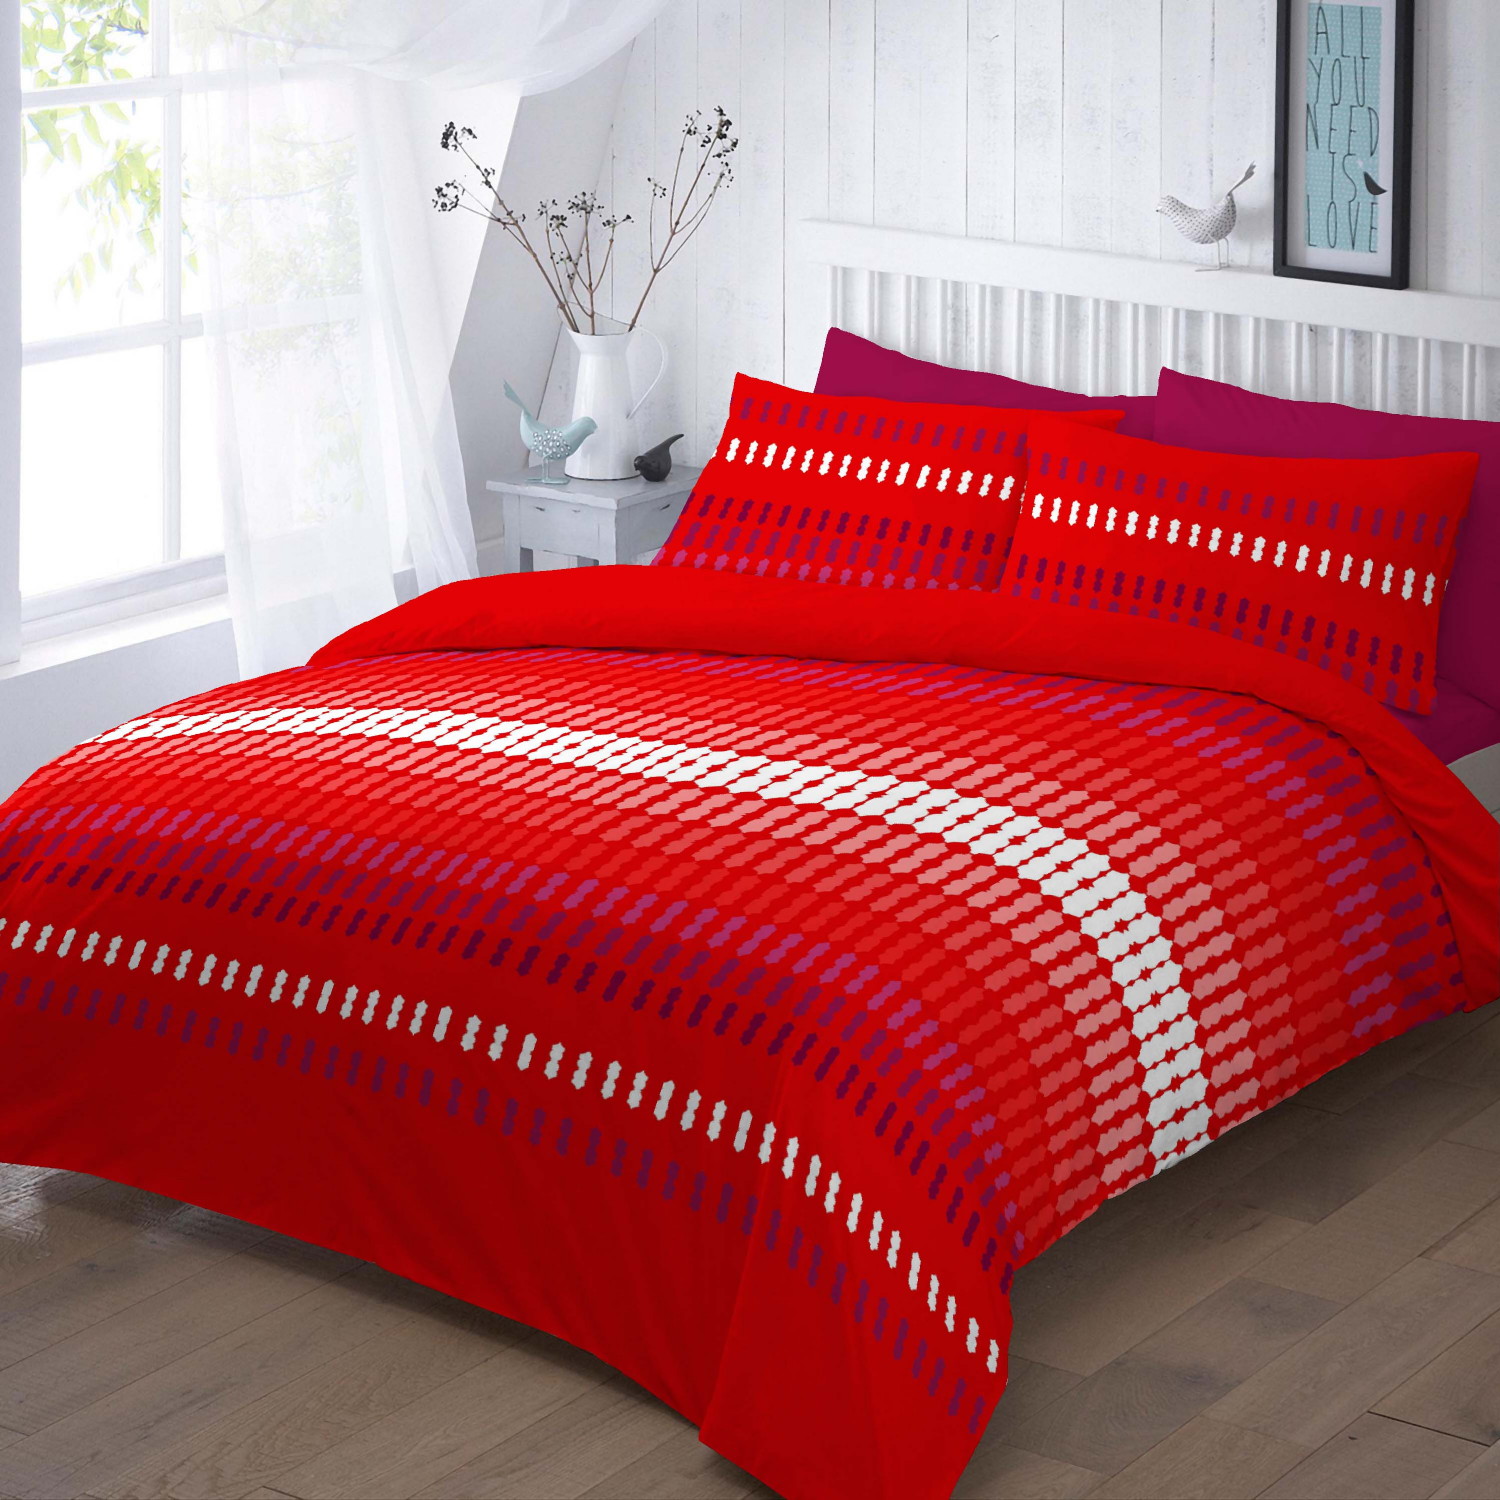 New Stripe Design Duvet Quilt Cover With Pillowcase Bedding Set In All Sizes 